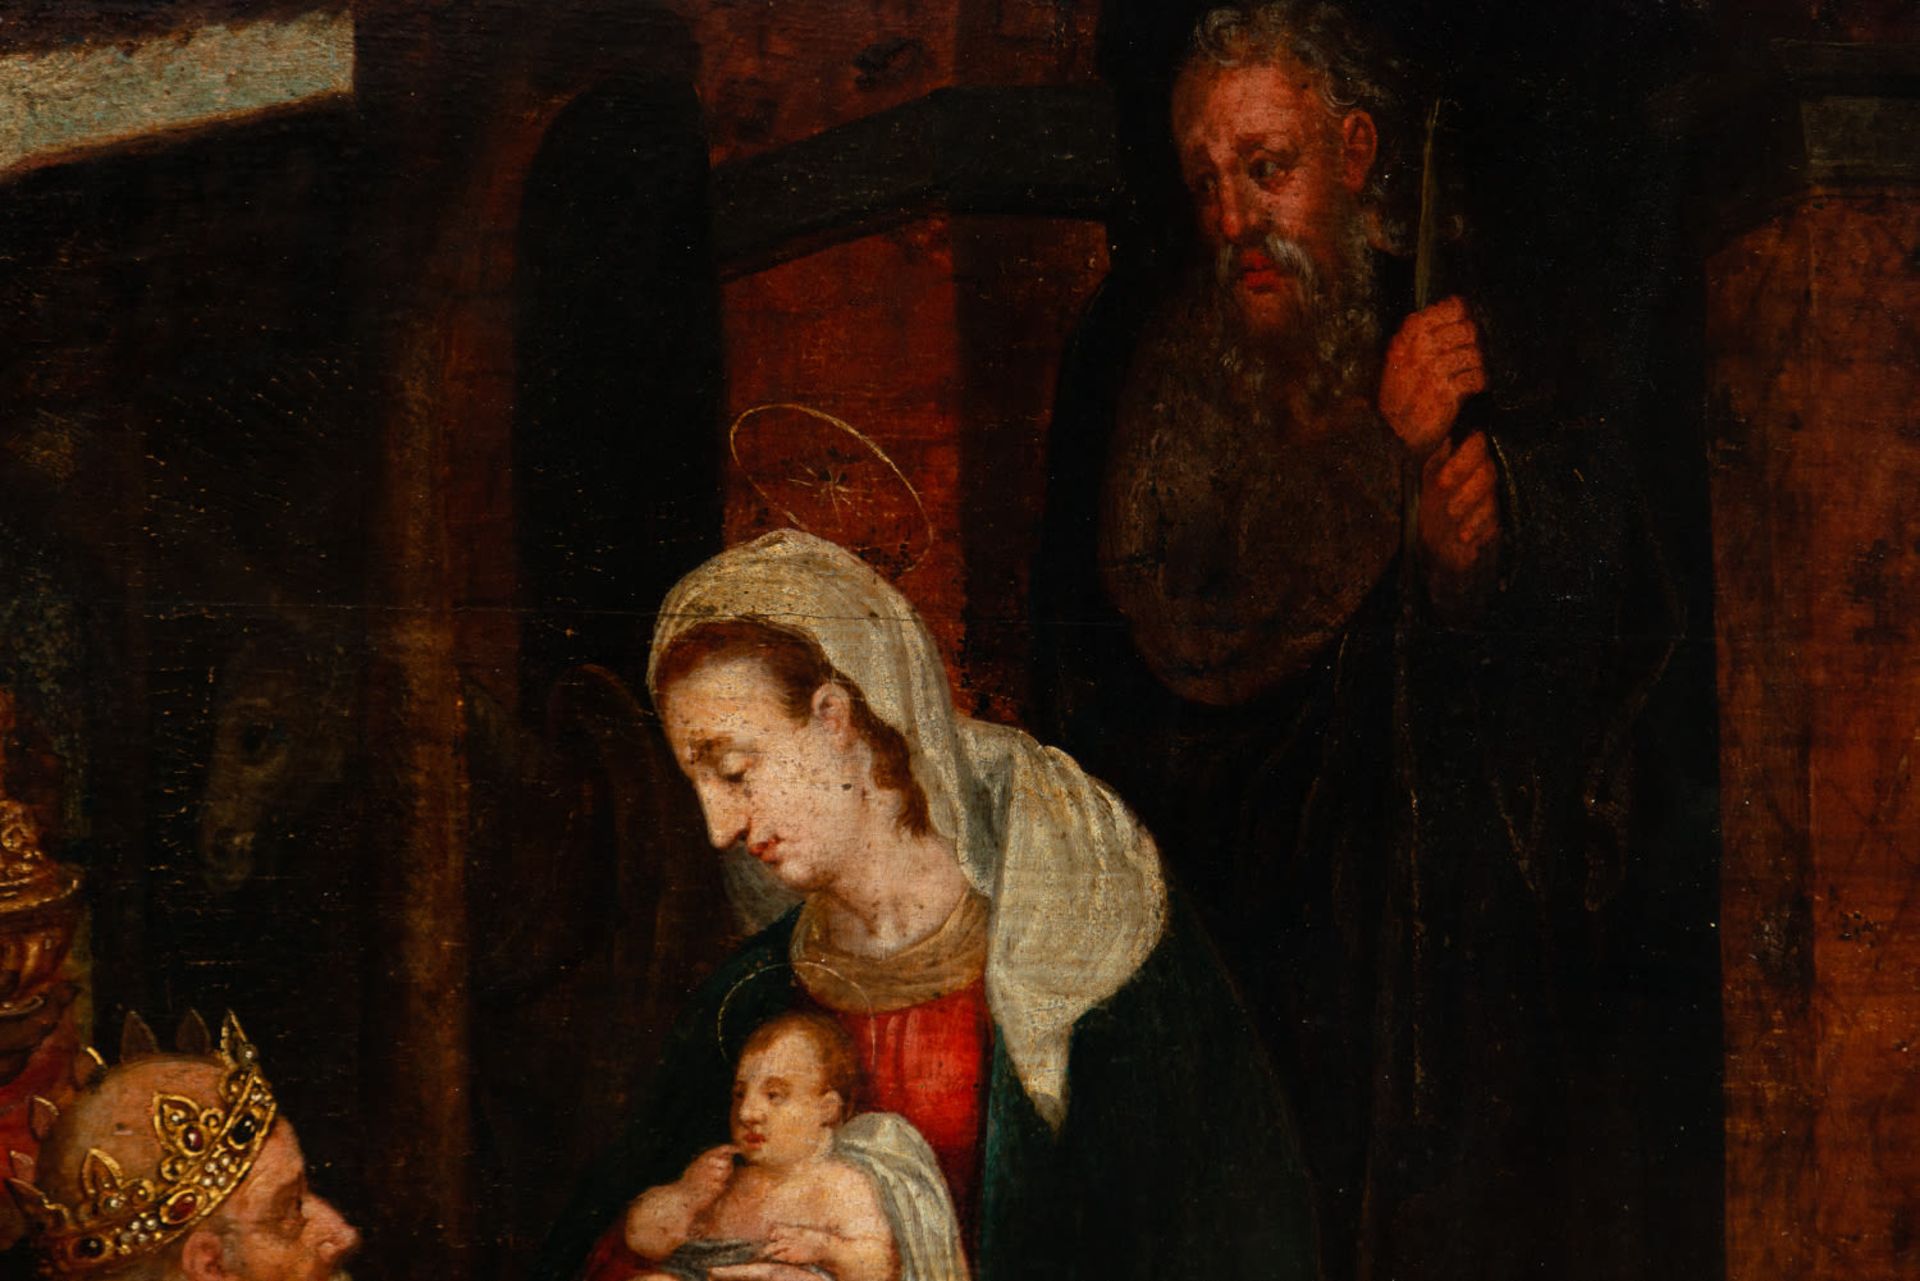 Adoration of the Magi, Flemish school of the 16th century - Image 4 of 5